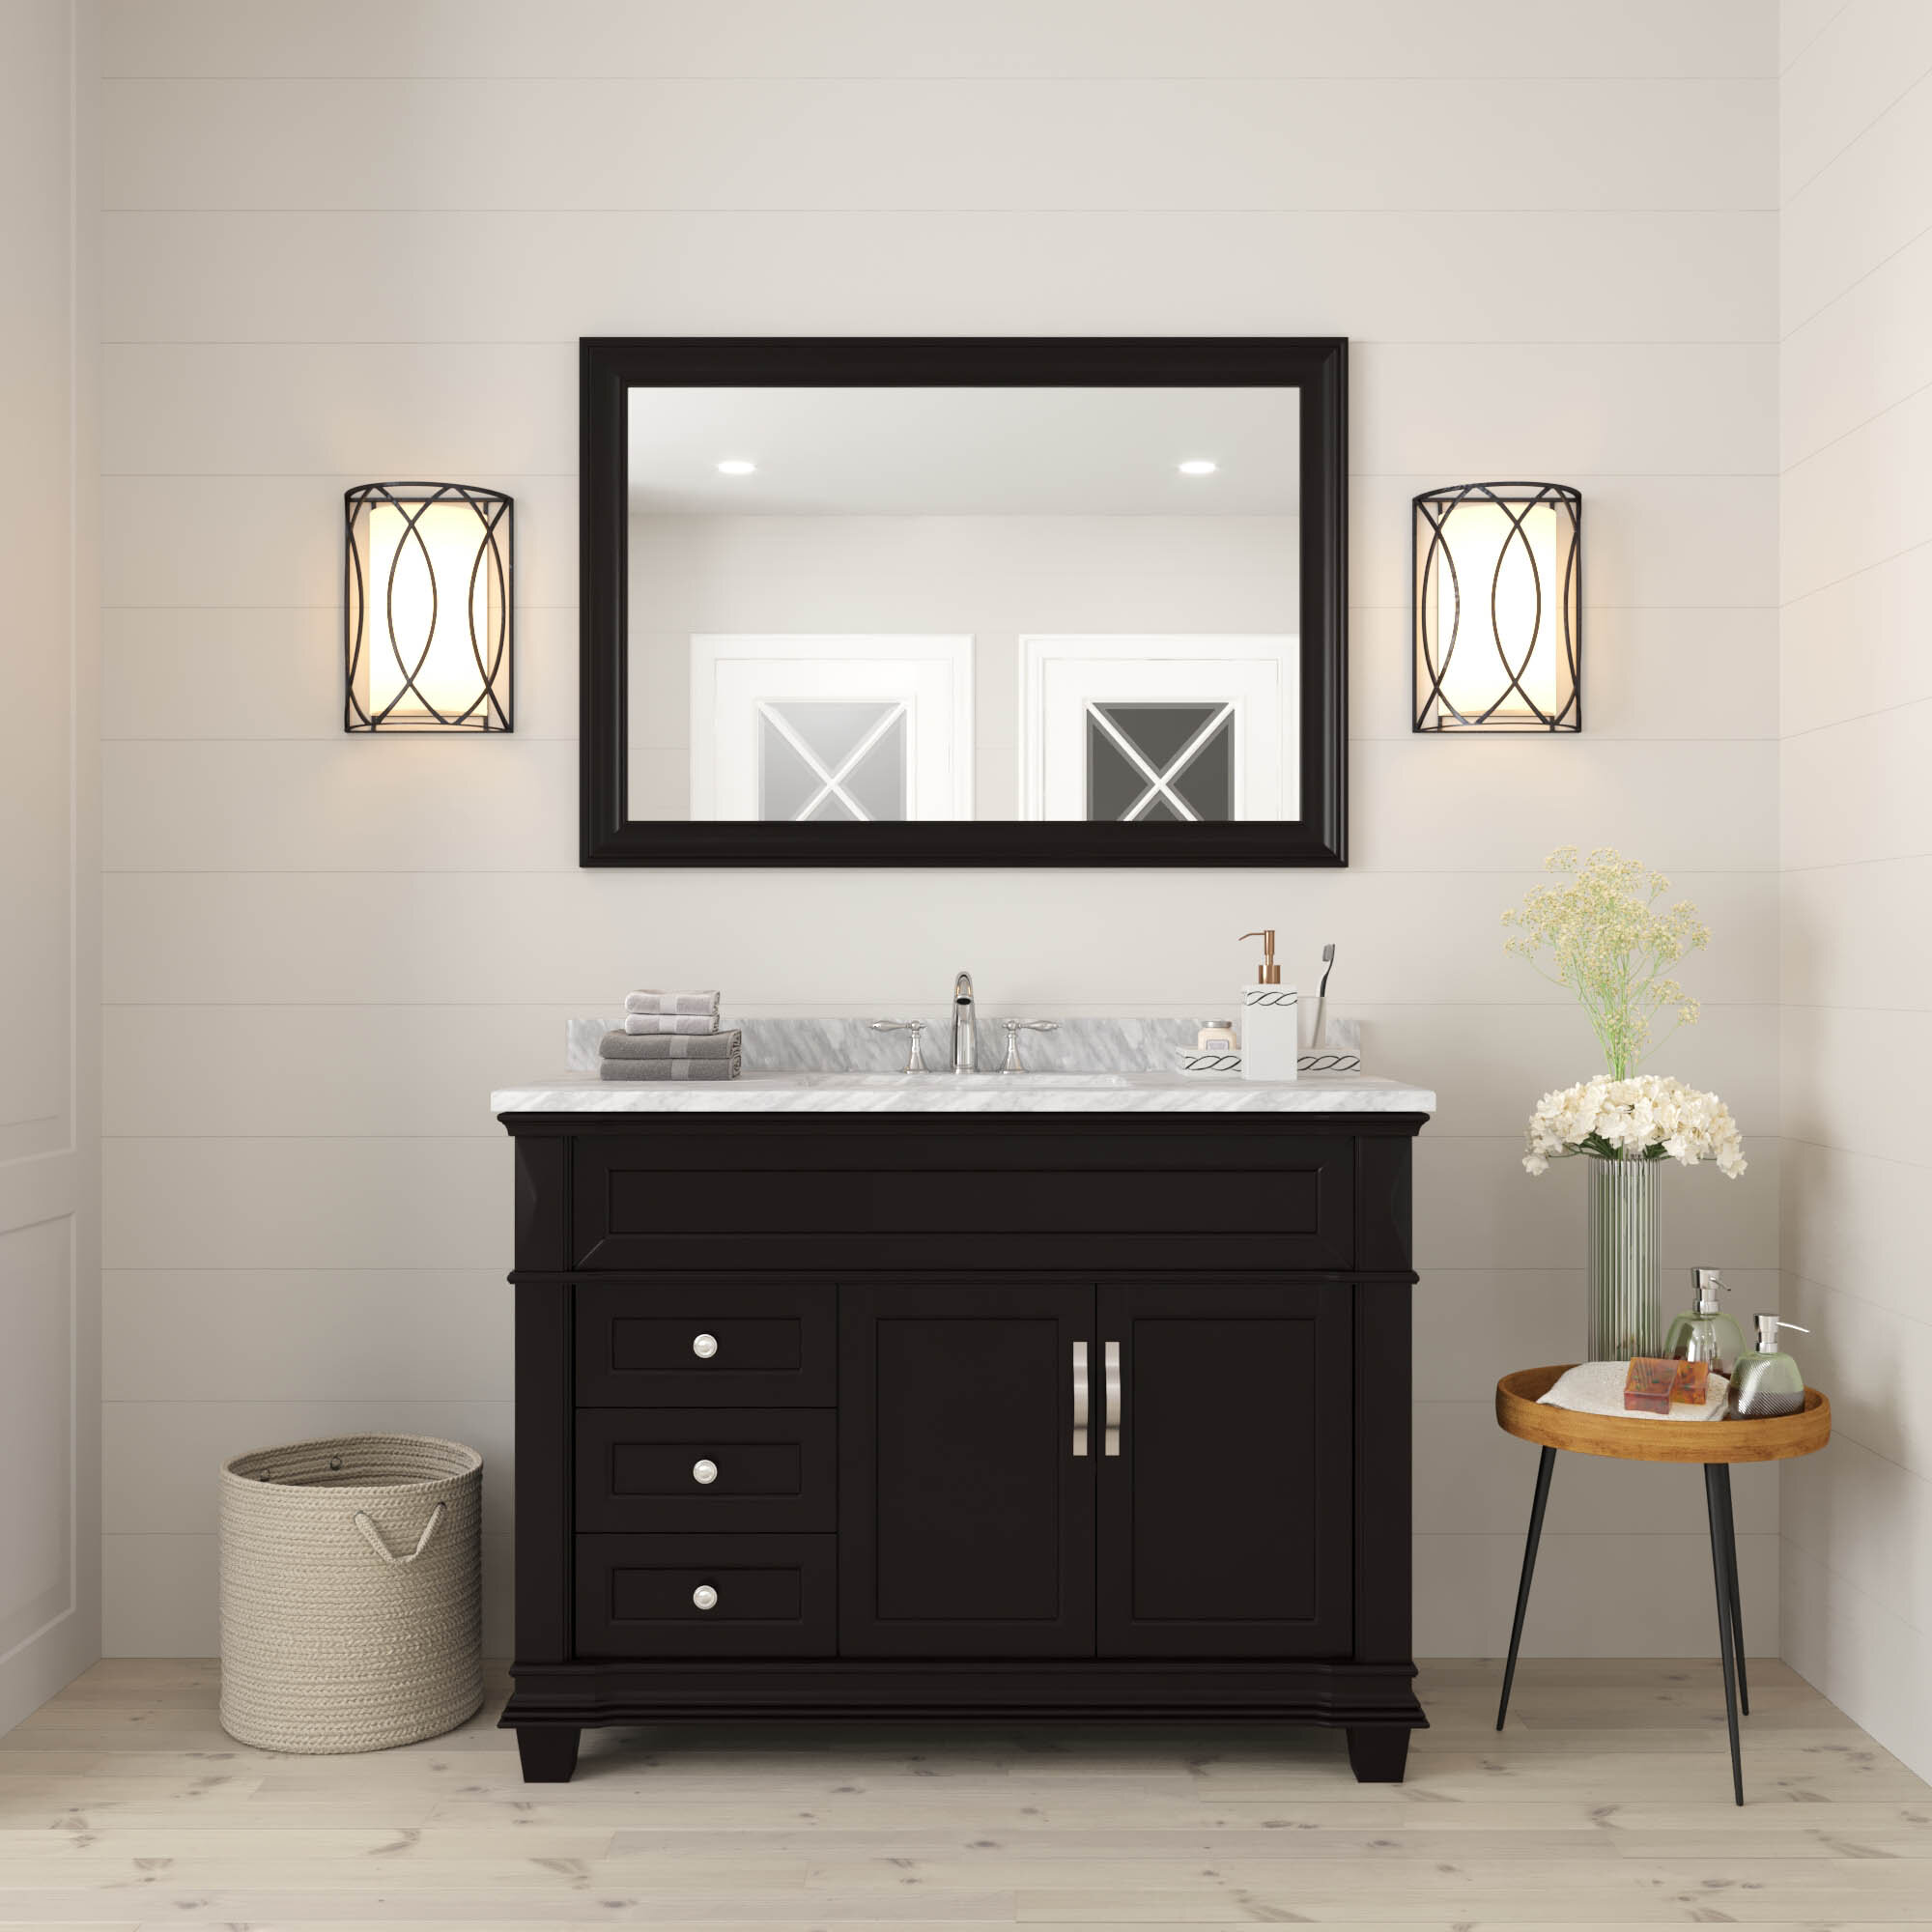 Darby Home Co Kace 48.8'' Free-standing Single Bathroom Vanity with ...